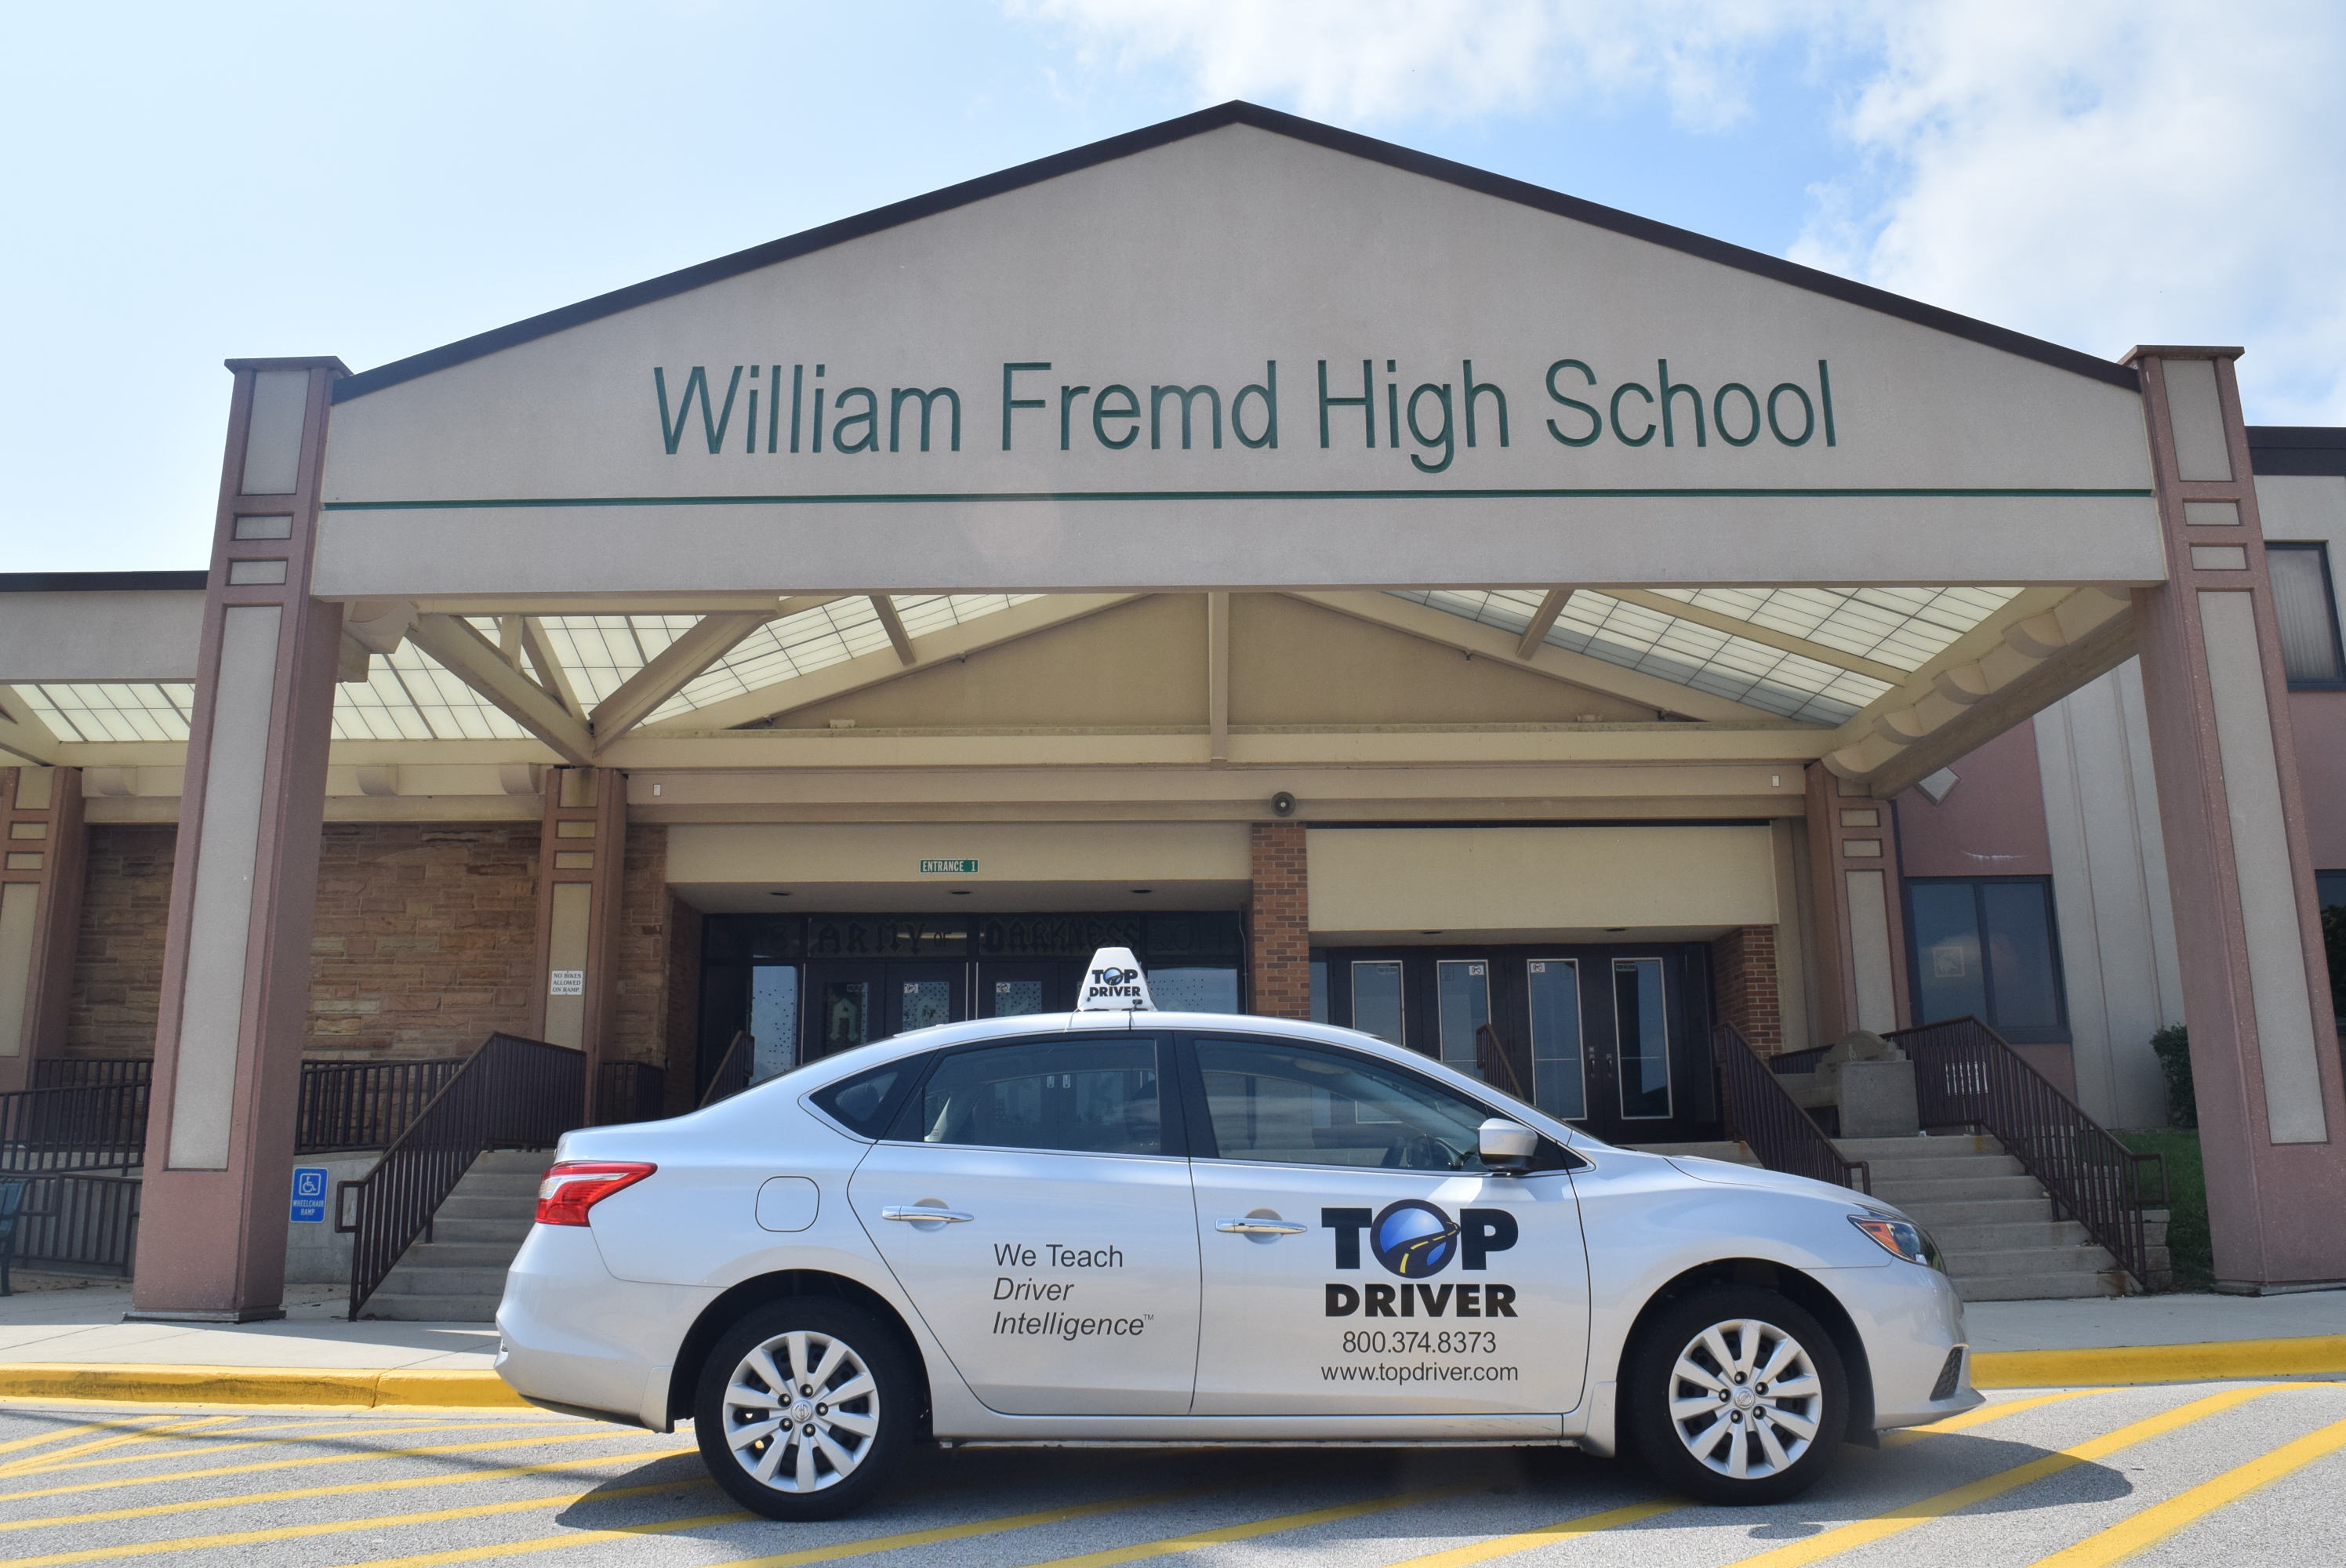 Top Driver car outside of William Fremd High School.